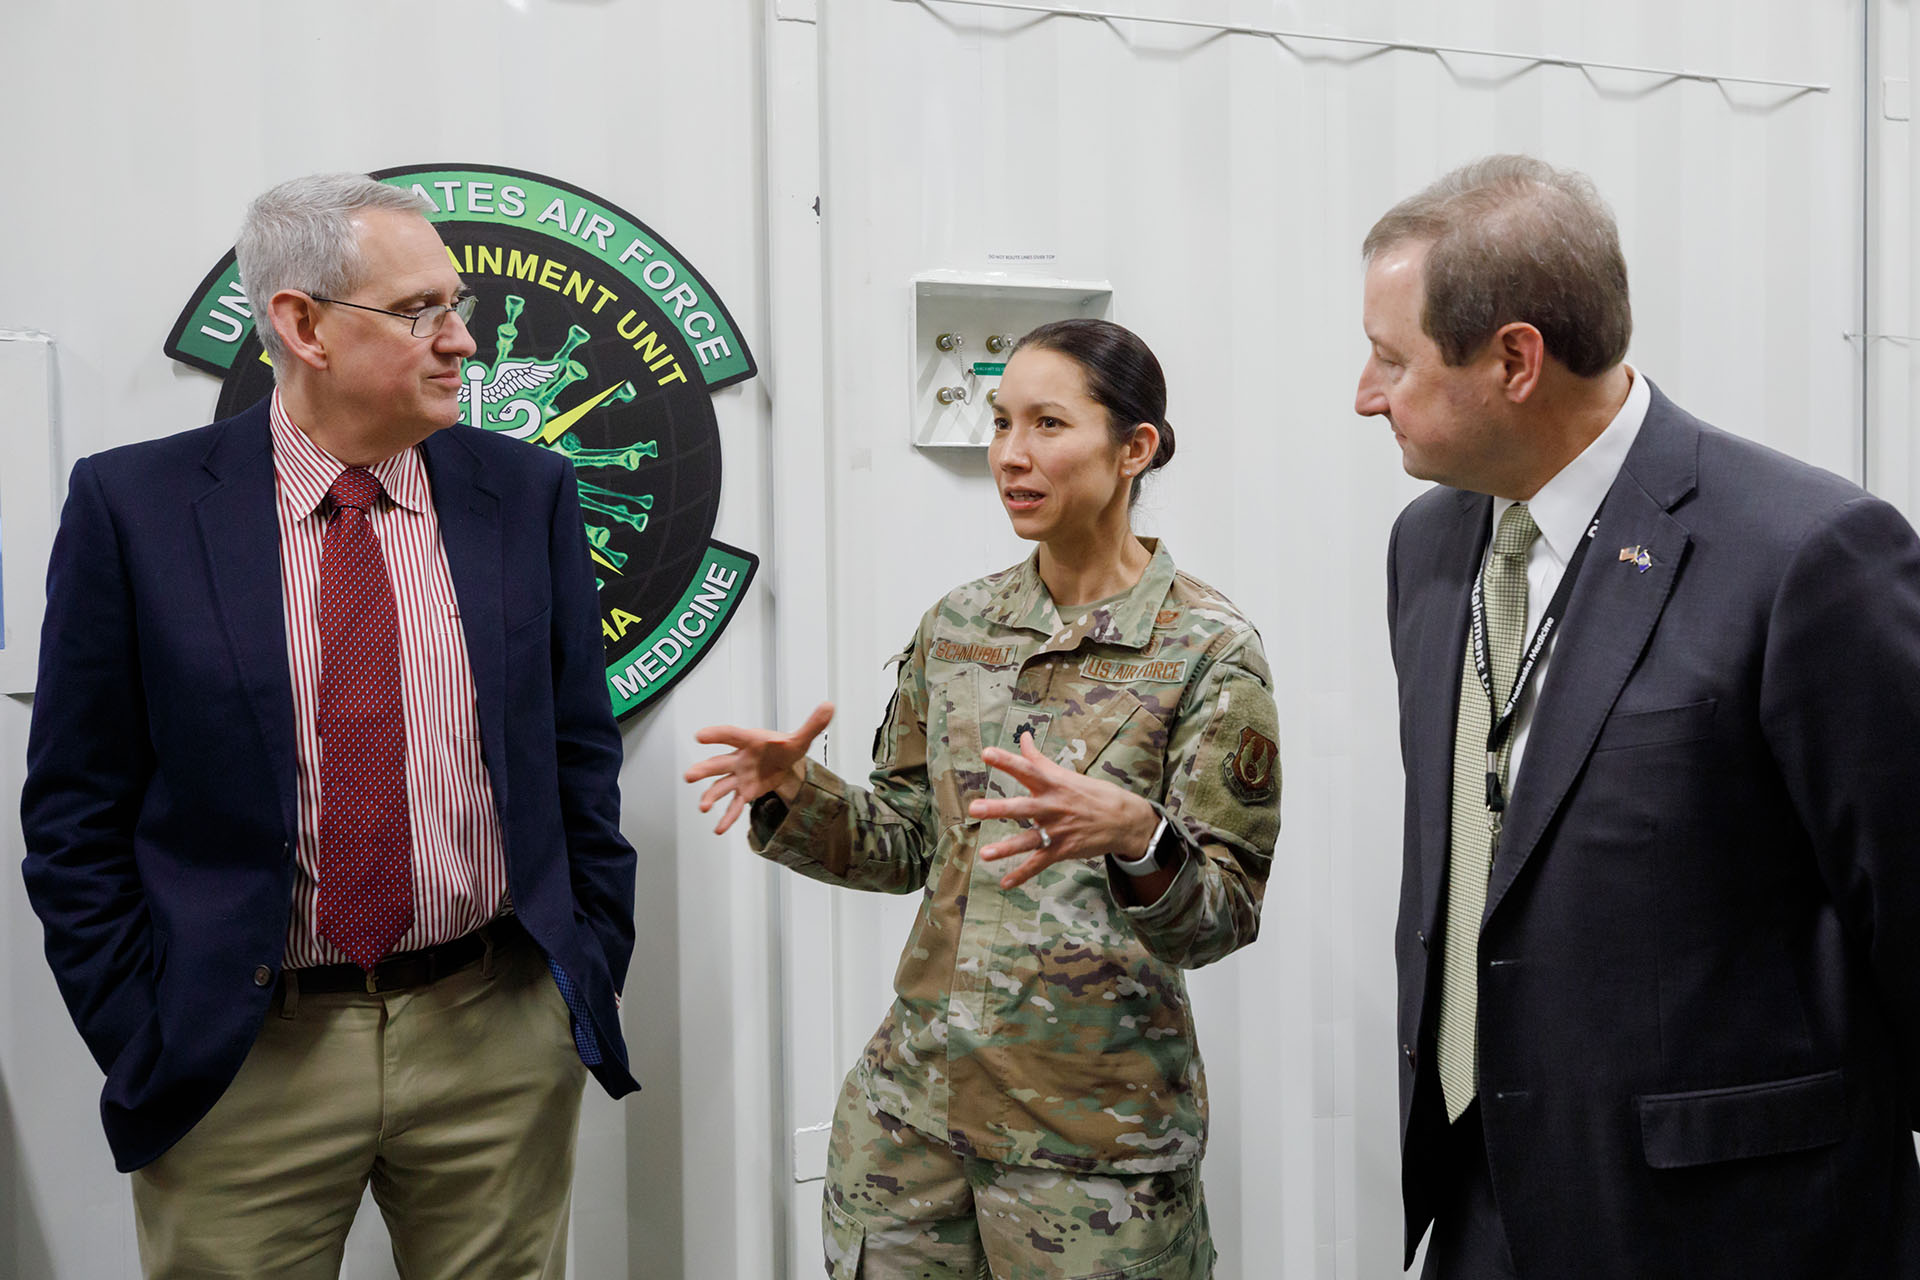 At center&comma; Lt&period; Col Elizabeth Schnaubelt&comma; MD&comma; led &lpar;at left&rpar; Major Gen&period; George Appenzeller&comma; MD&comma; special assistant to the Defense Health Agency director&comma; on a tour of the negatively pressurized CONEX unit in December along with &lpar;at right&rpar; Chris Kratochvil&comma; MD&comma; UNMC vice chancellor for external relations&period;